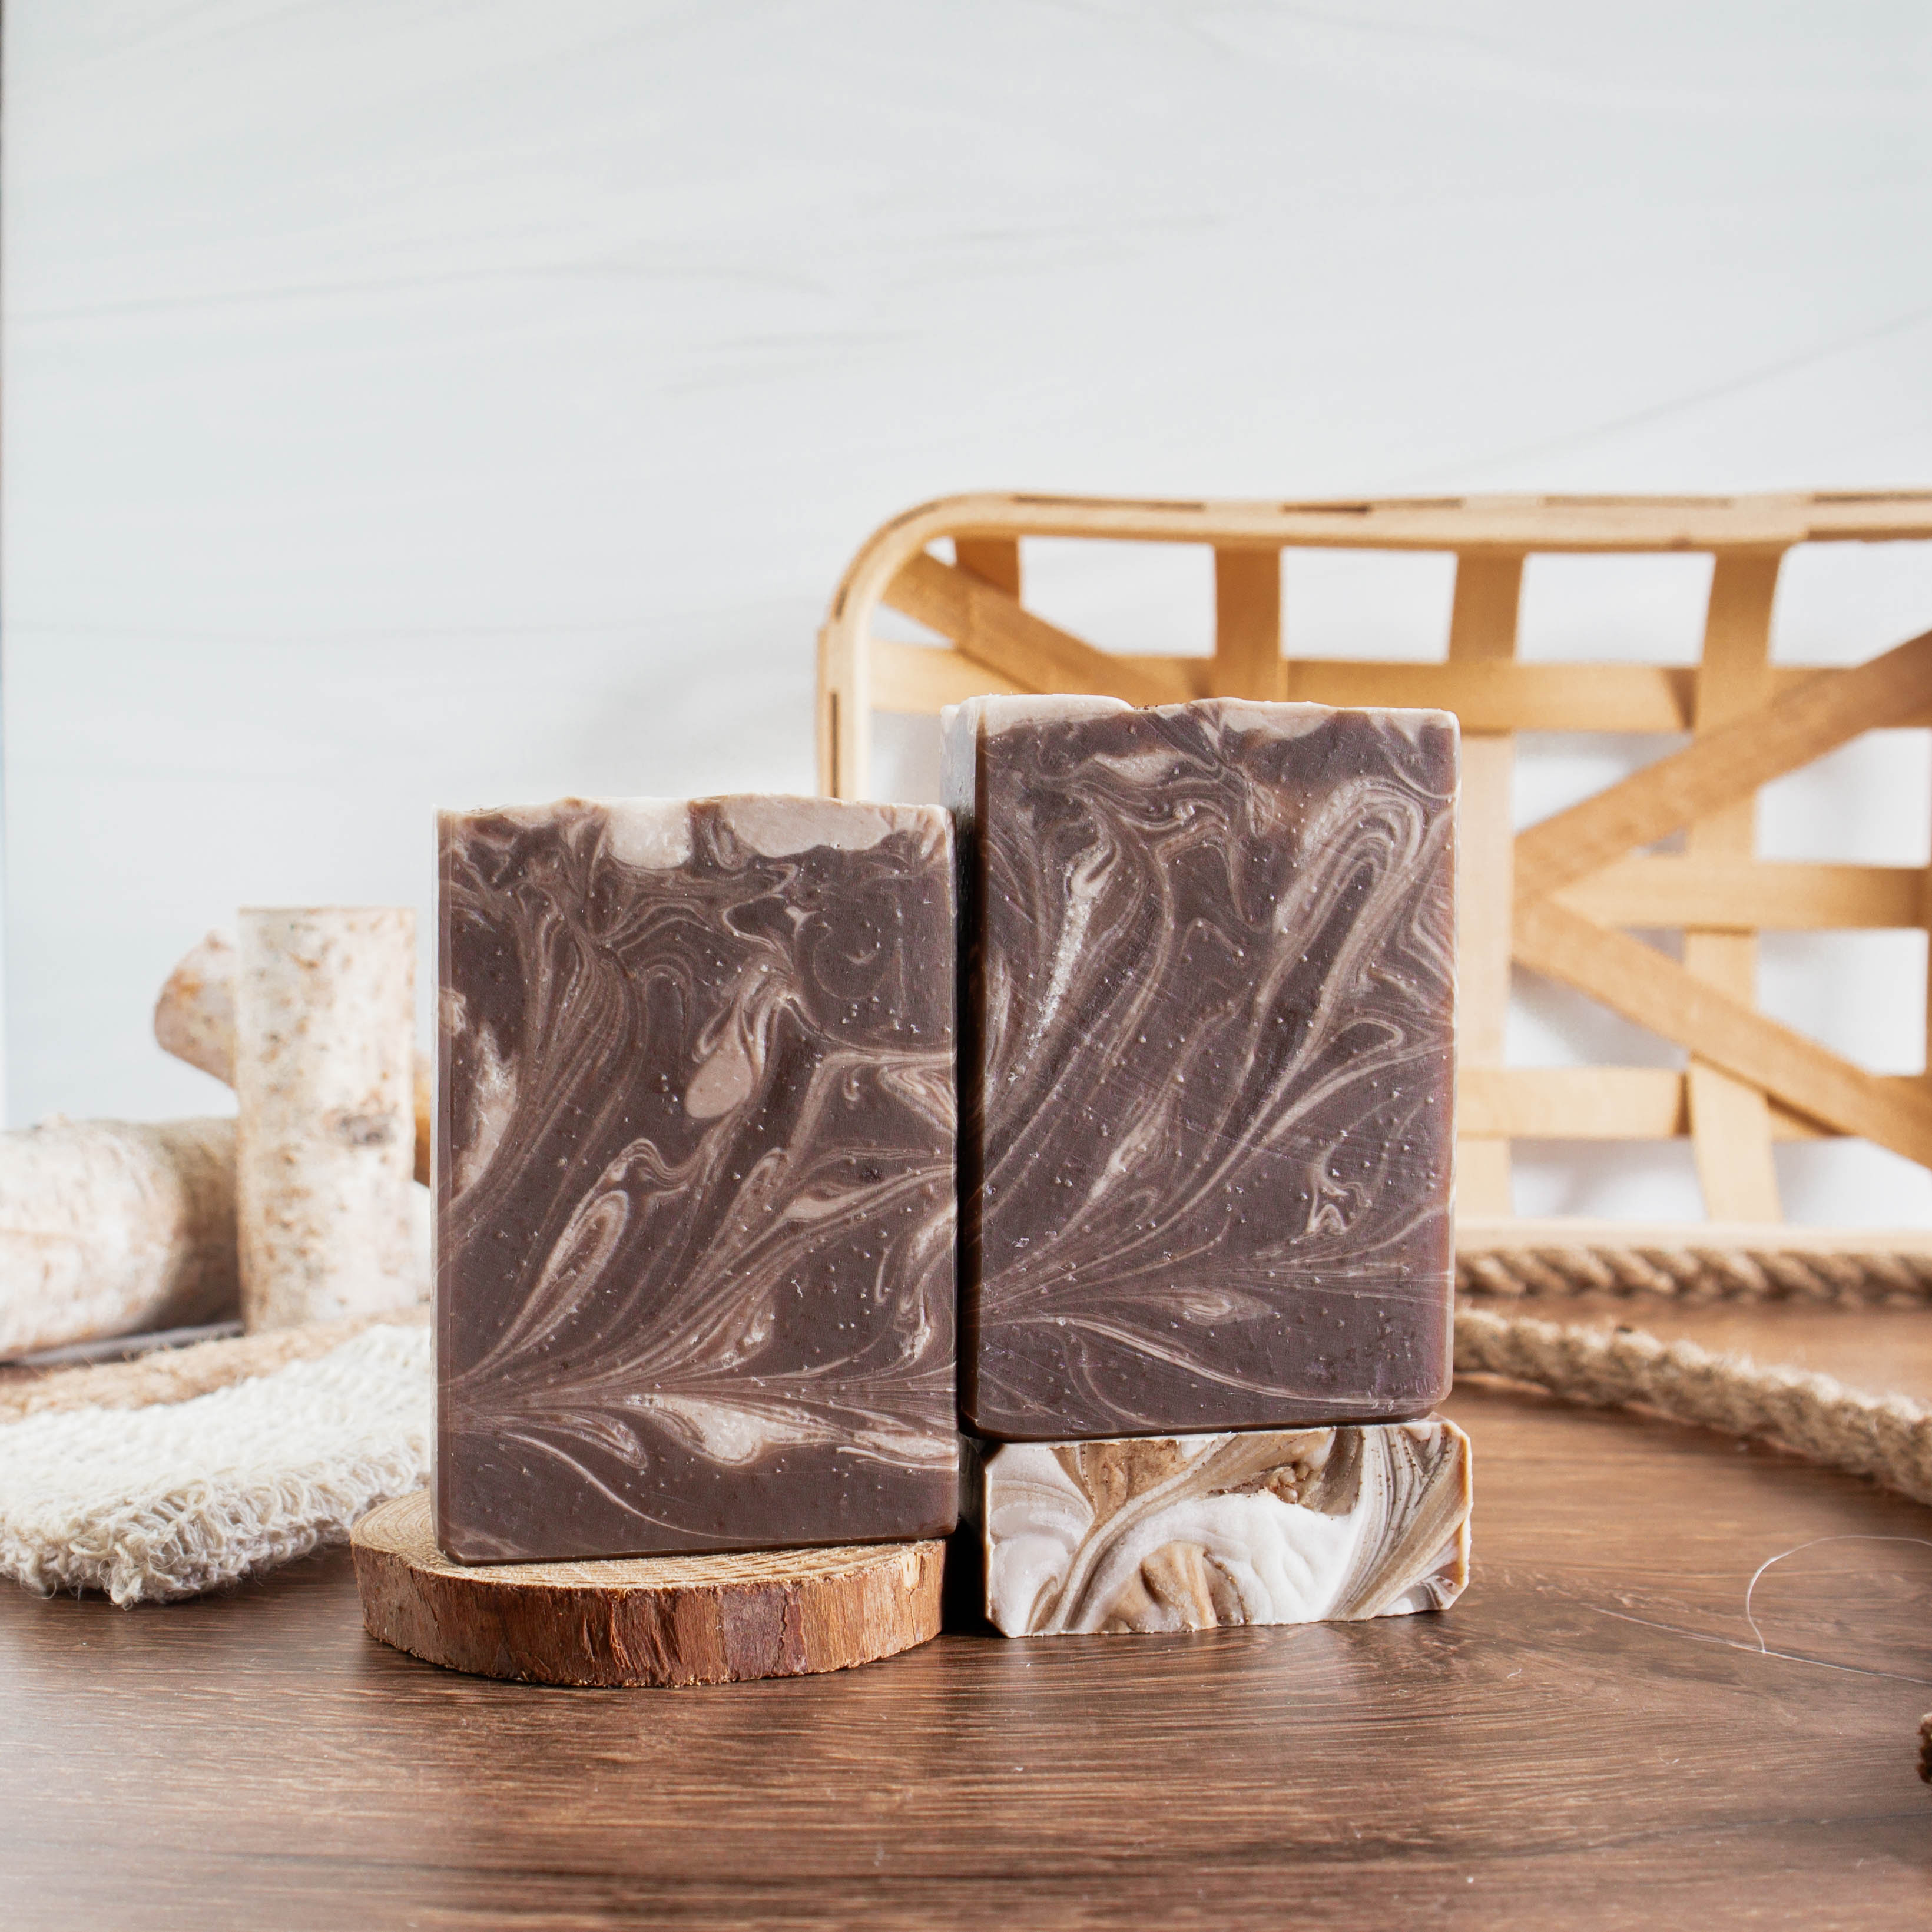 3 bars of Tonka and Oud showing the dark brown soap with different creamy swirls throughout. 2 bars are facing forward and one is laying flat to show the top of the bar. There are small wood logs, rope and a woven basket in the background for interest.